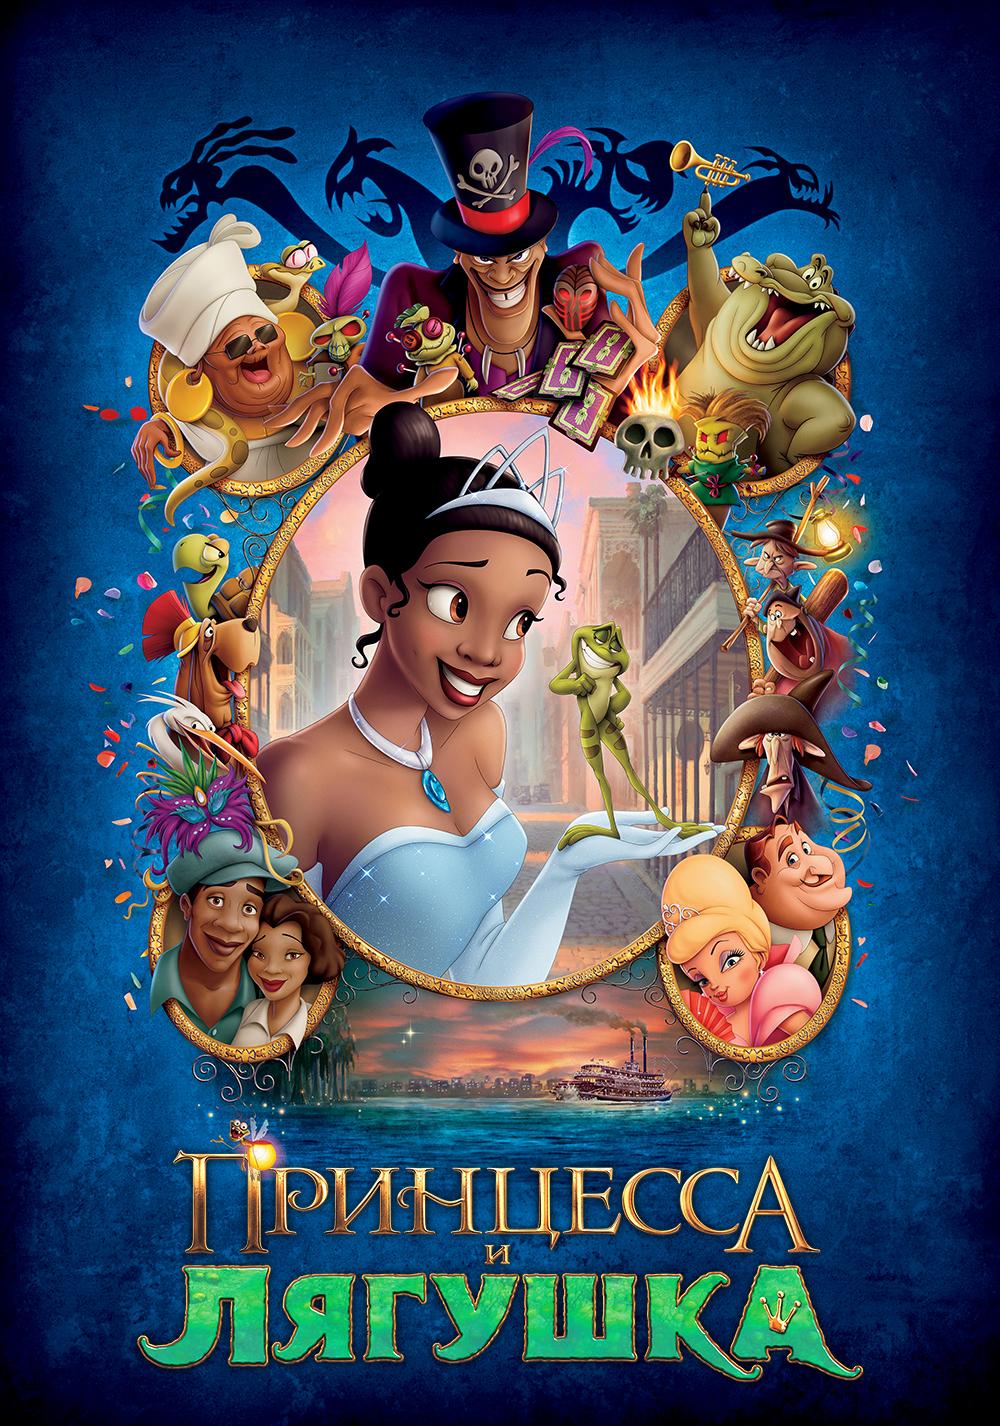 View, Download, Rate, and Comment on this The Princess And The Frog Movie.....